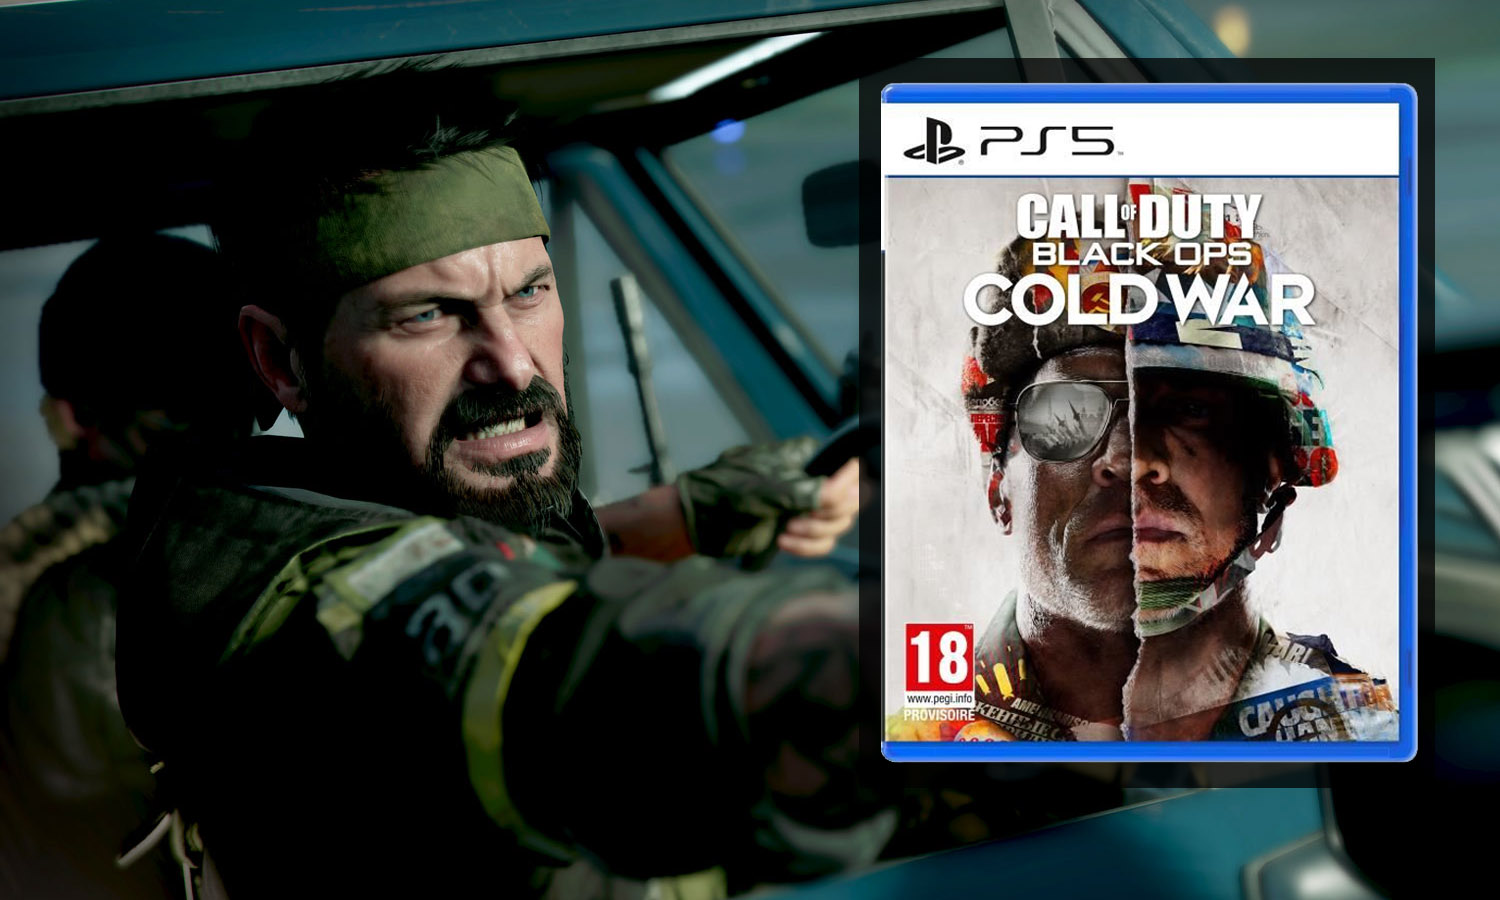 call of duty cold war ps5 campaign not installed